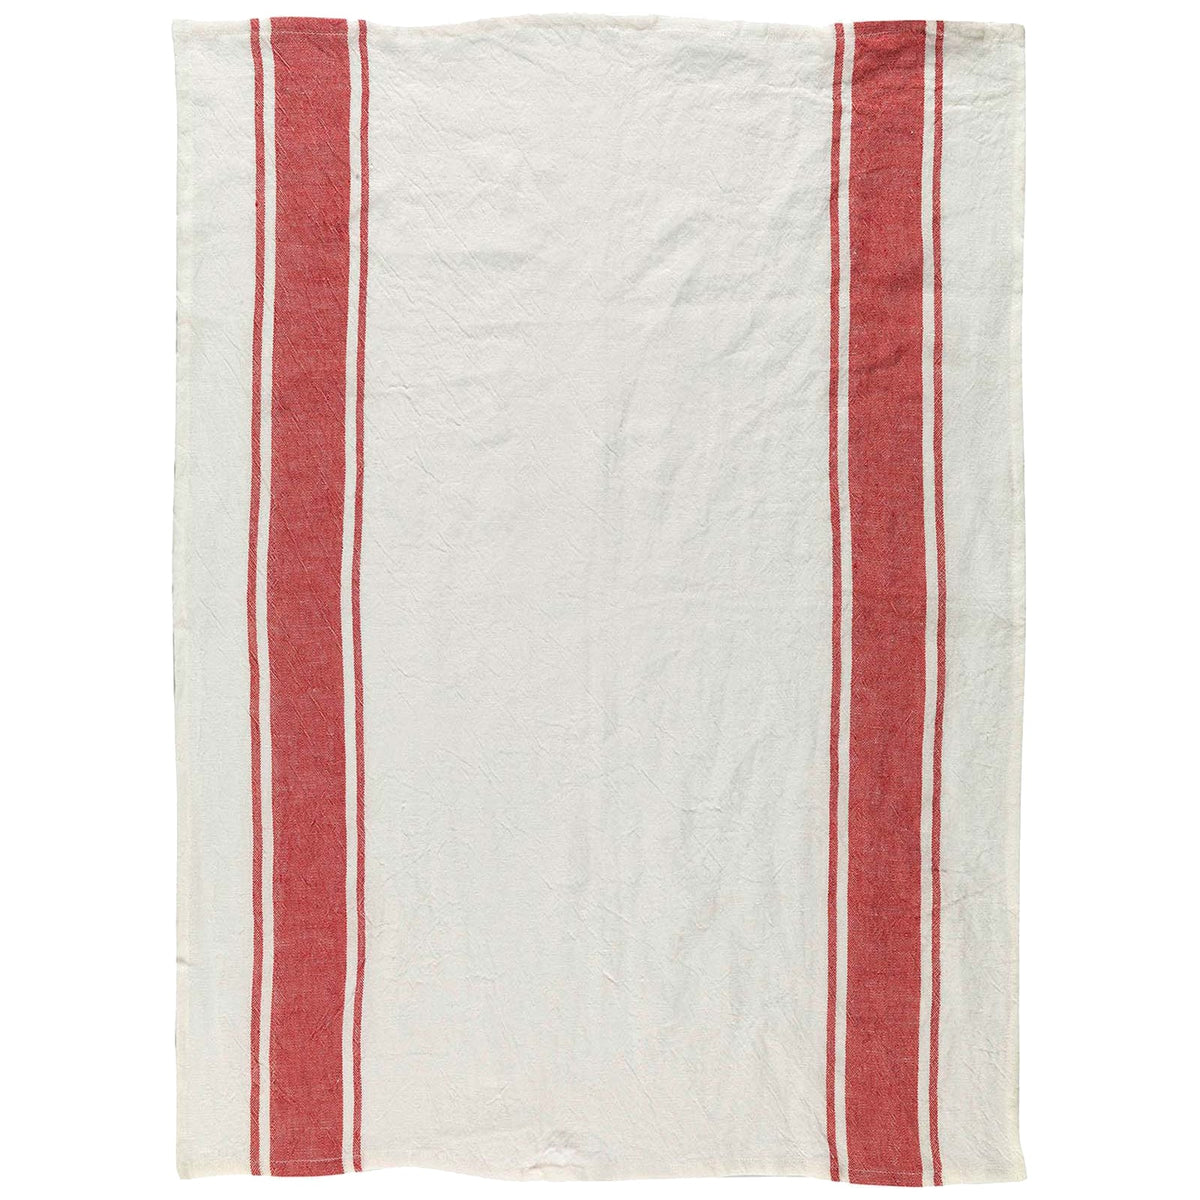 Trattoria Rosso Kitchen Towel Large Border Stripes sold as part of a mixed set of 2 in Italian Linen from Caskata